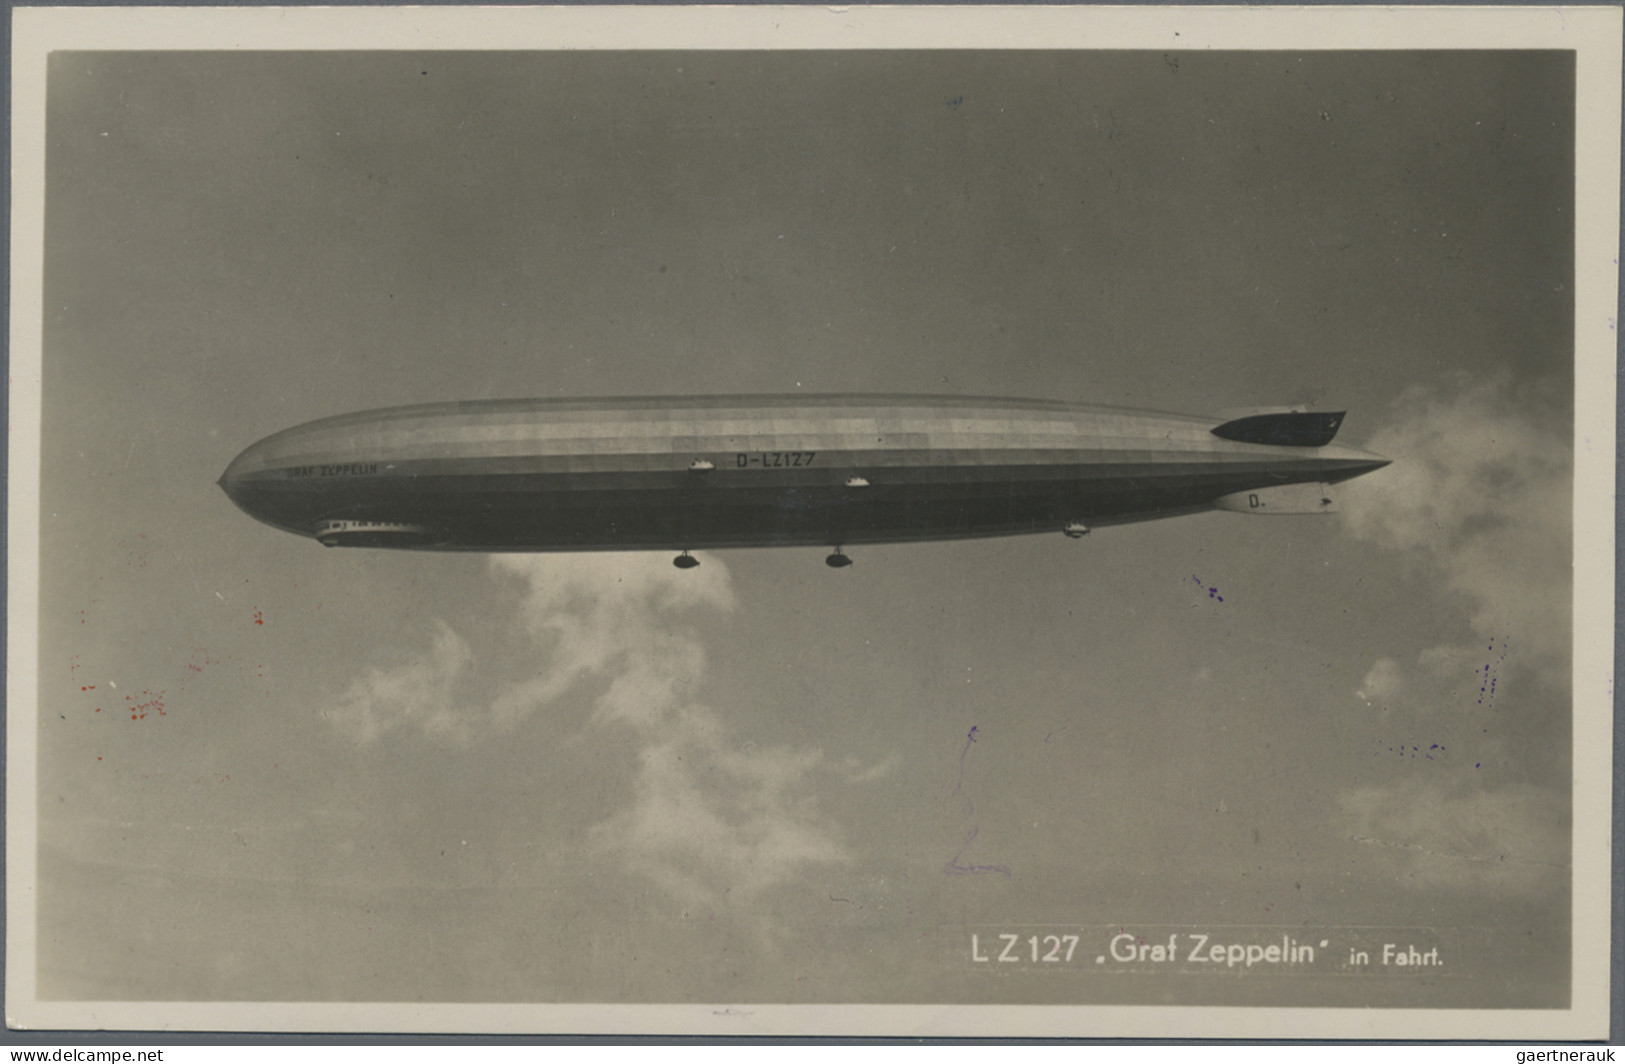 Zeppelin Mail - Germany: 1933, 4th South America Flight Incombination With Catap - Airmail & Zeppelin